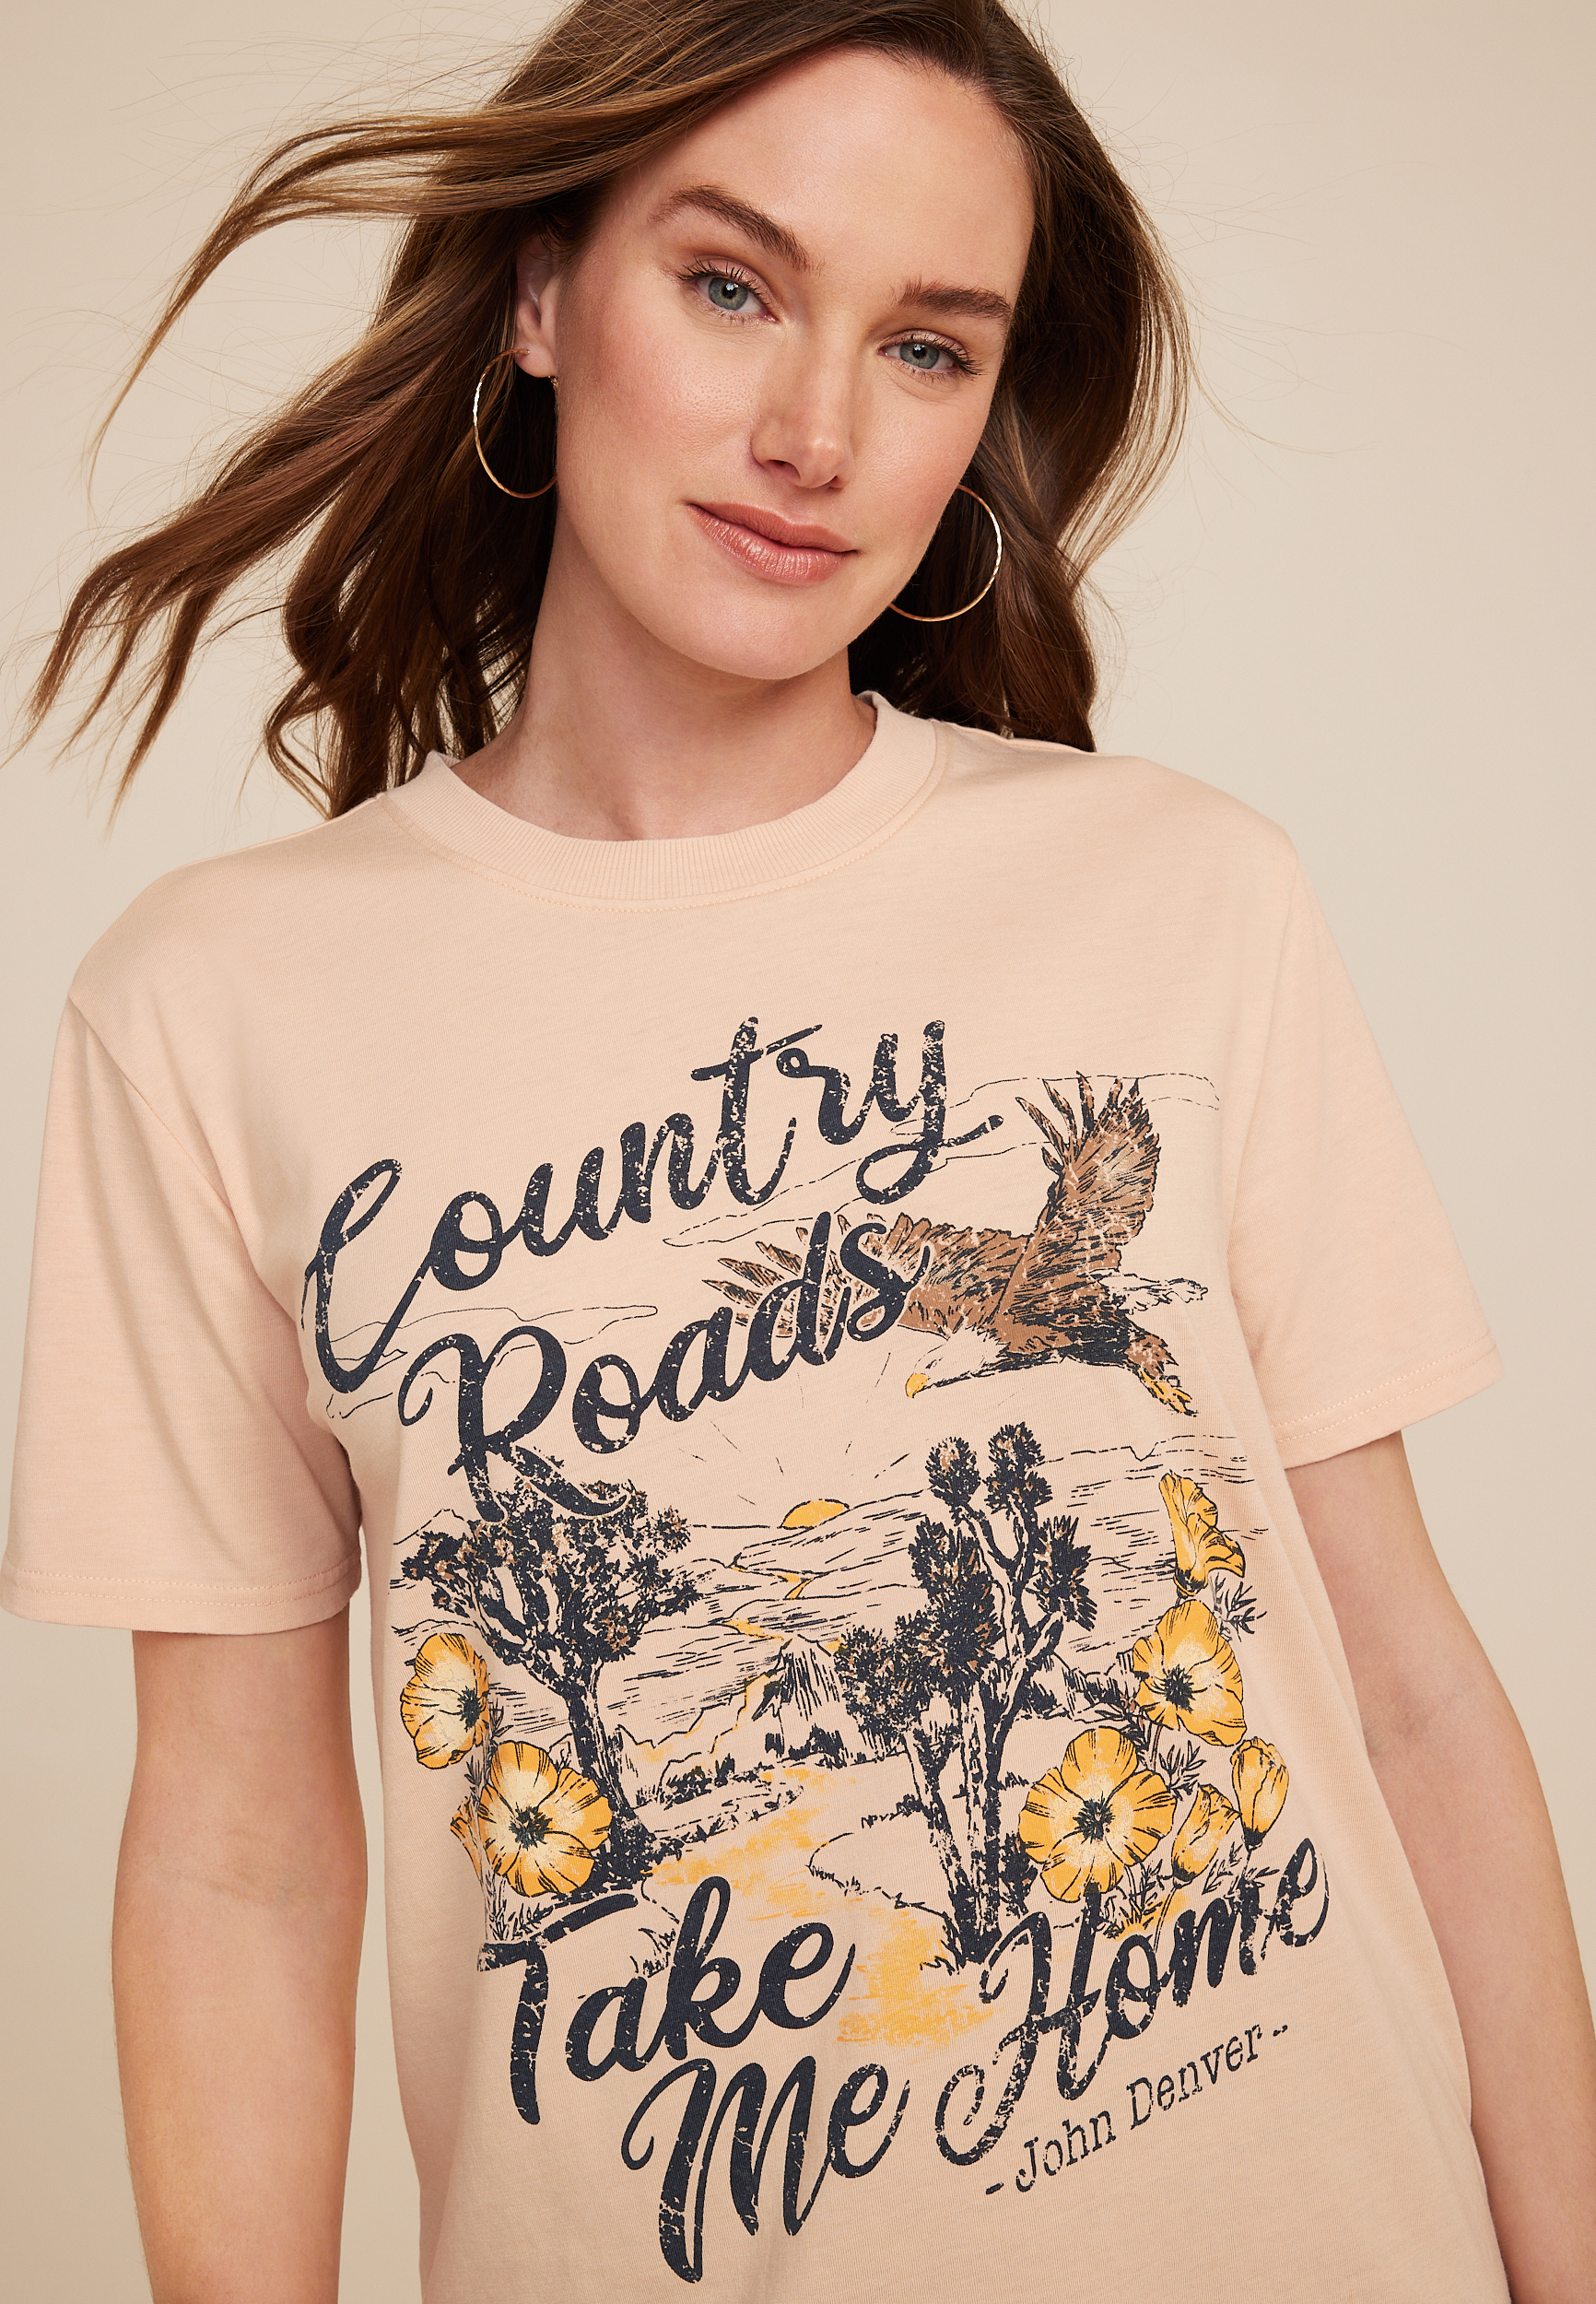 Shop Cotton T-Shirts for Women Online - Country Road